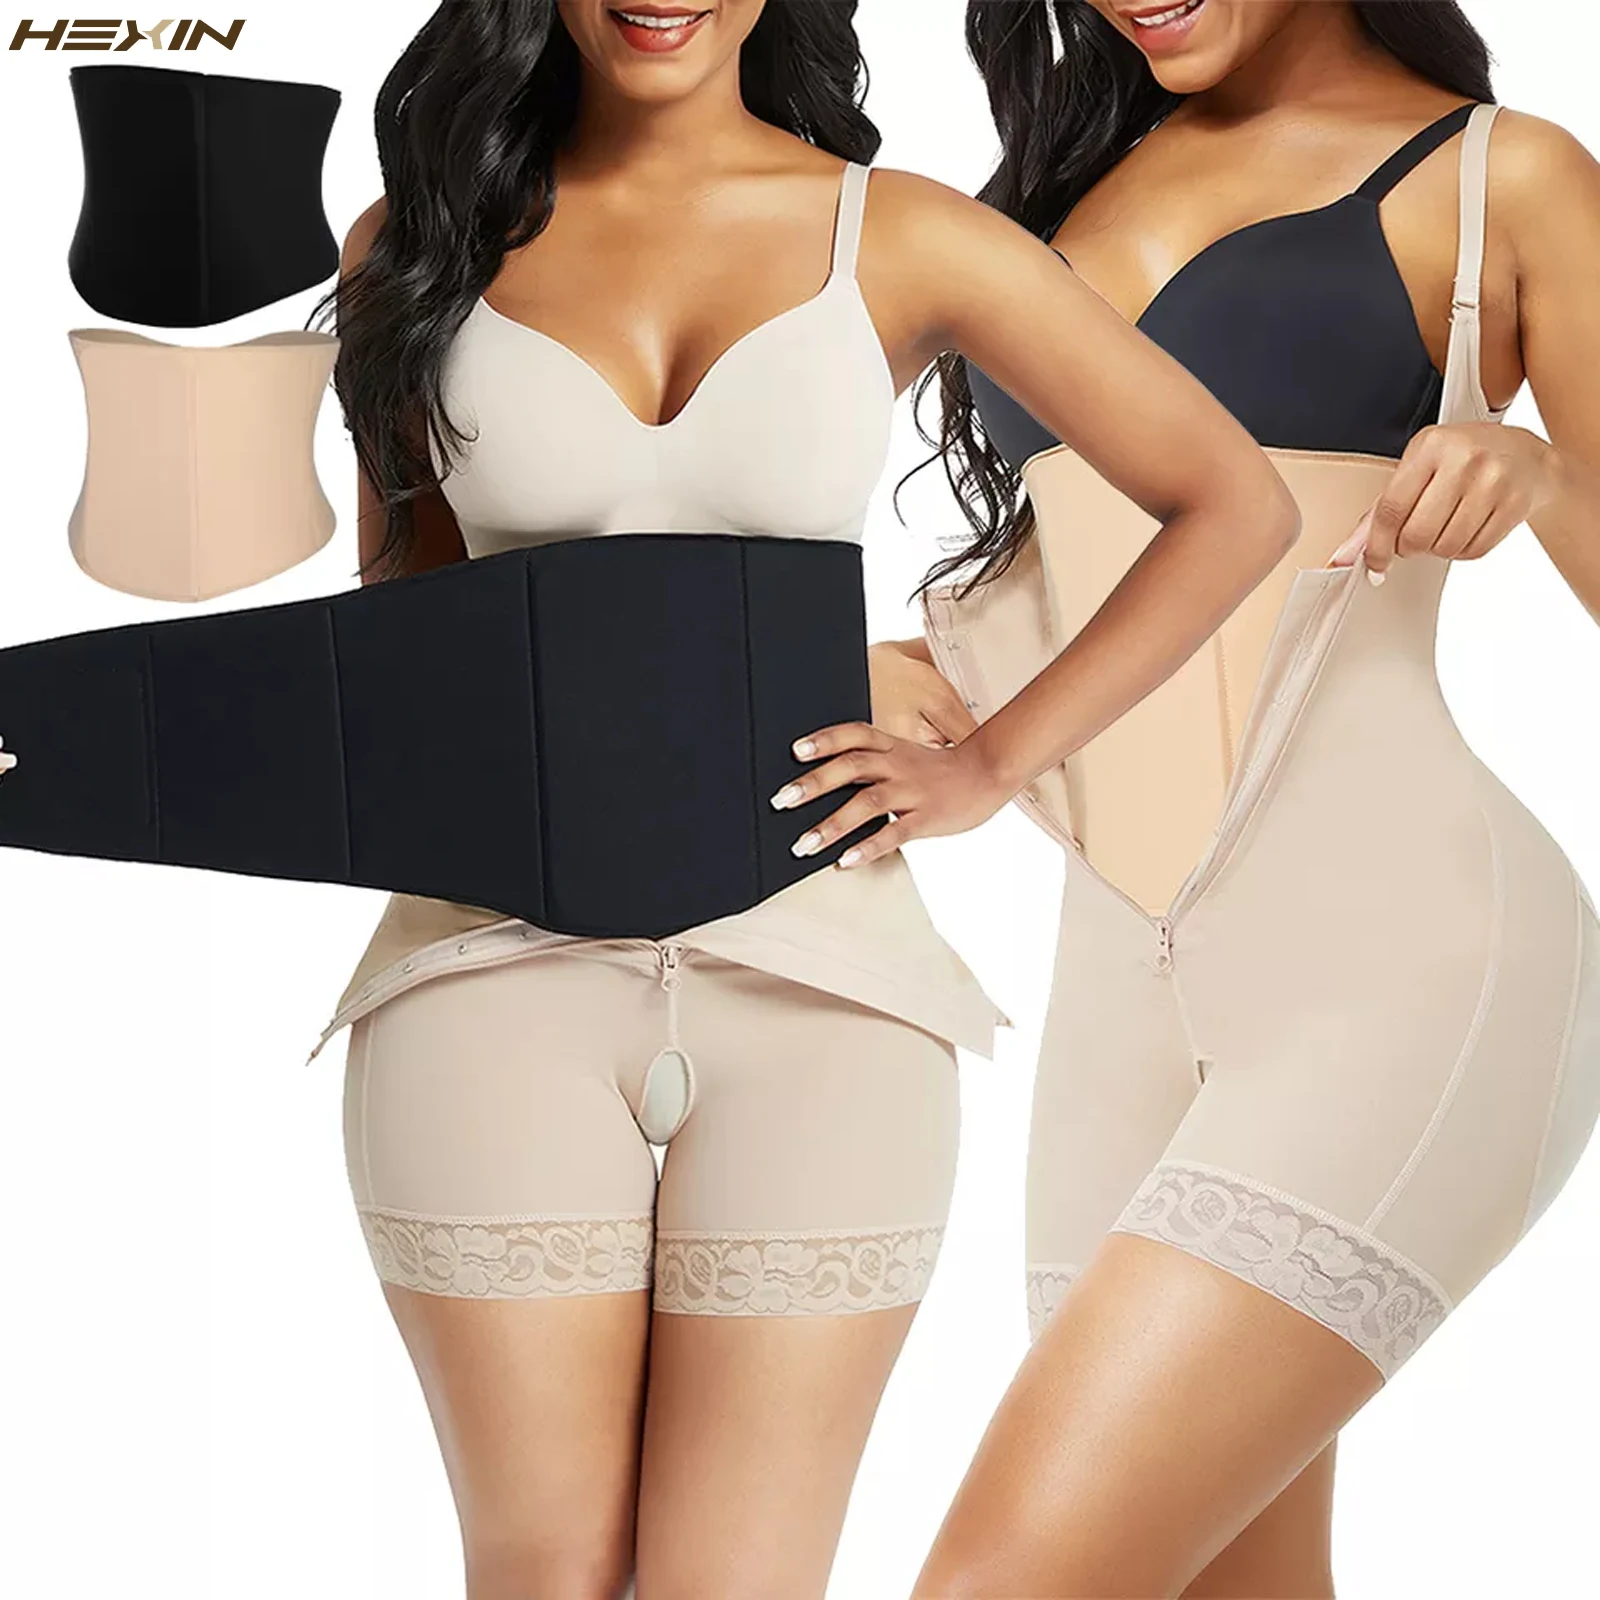 360 Lipo Foam Wrap Around Ab Board Post Surgery Flattening Abdominal  Compression Waist Belly Table for Liposuction Recovery